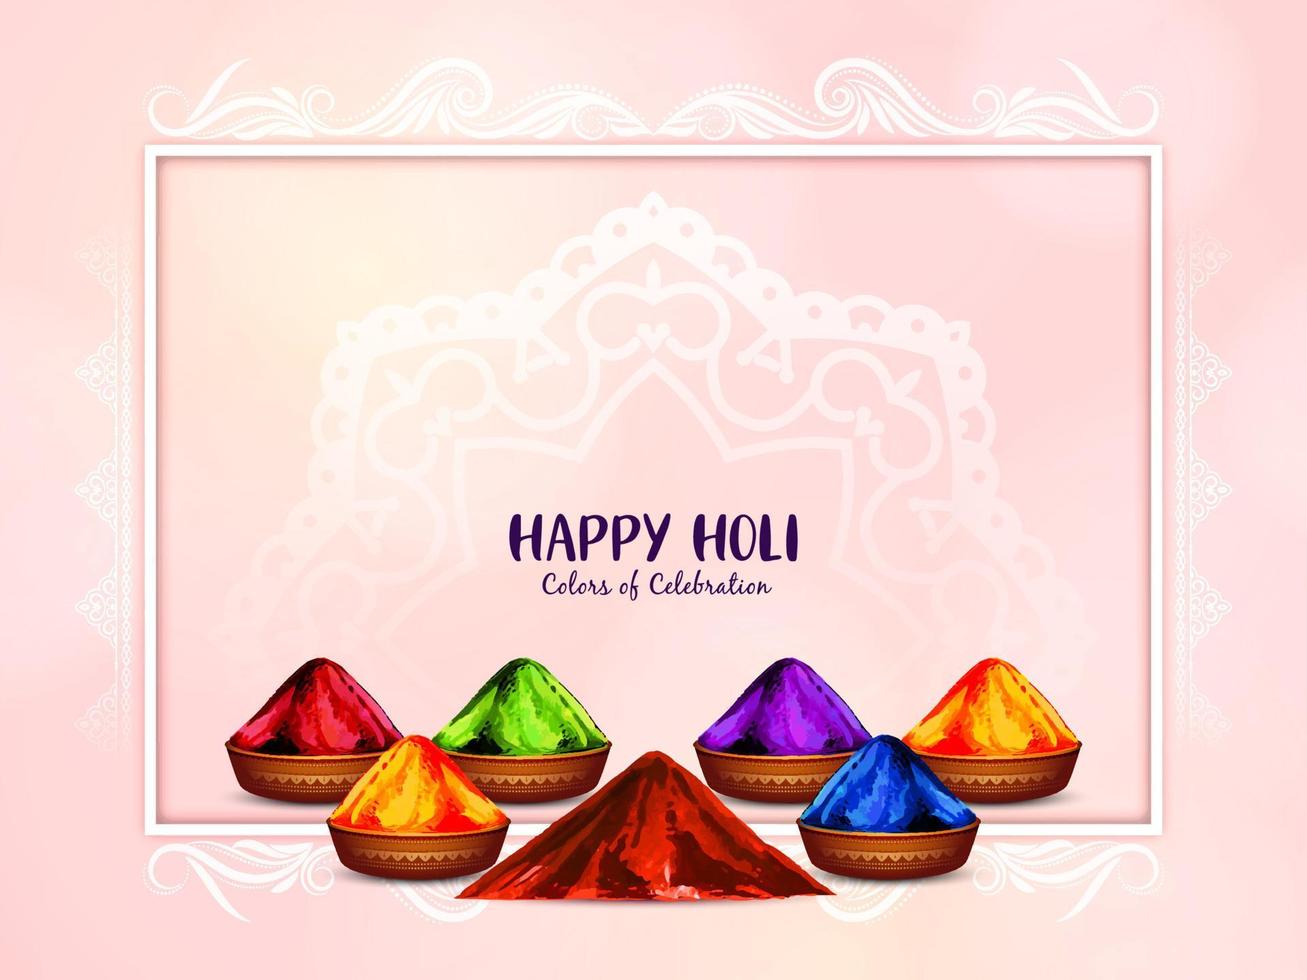 Happy Holi Indian traditional colorful festival background design vector